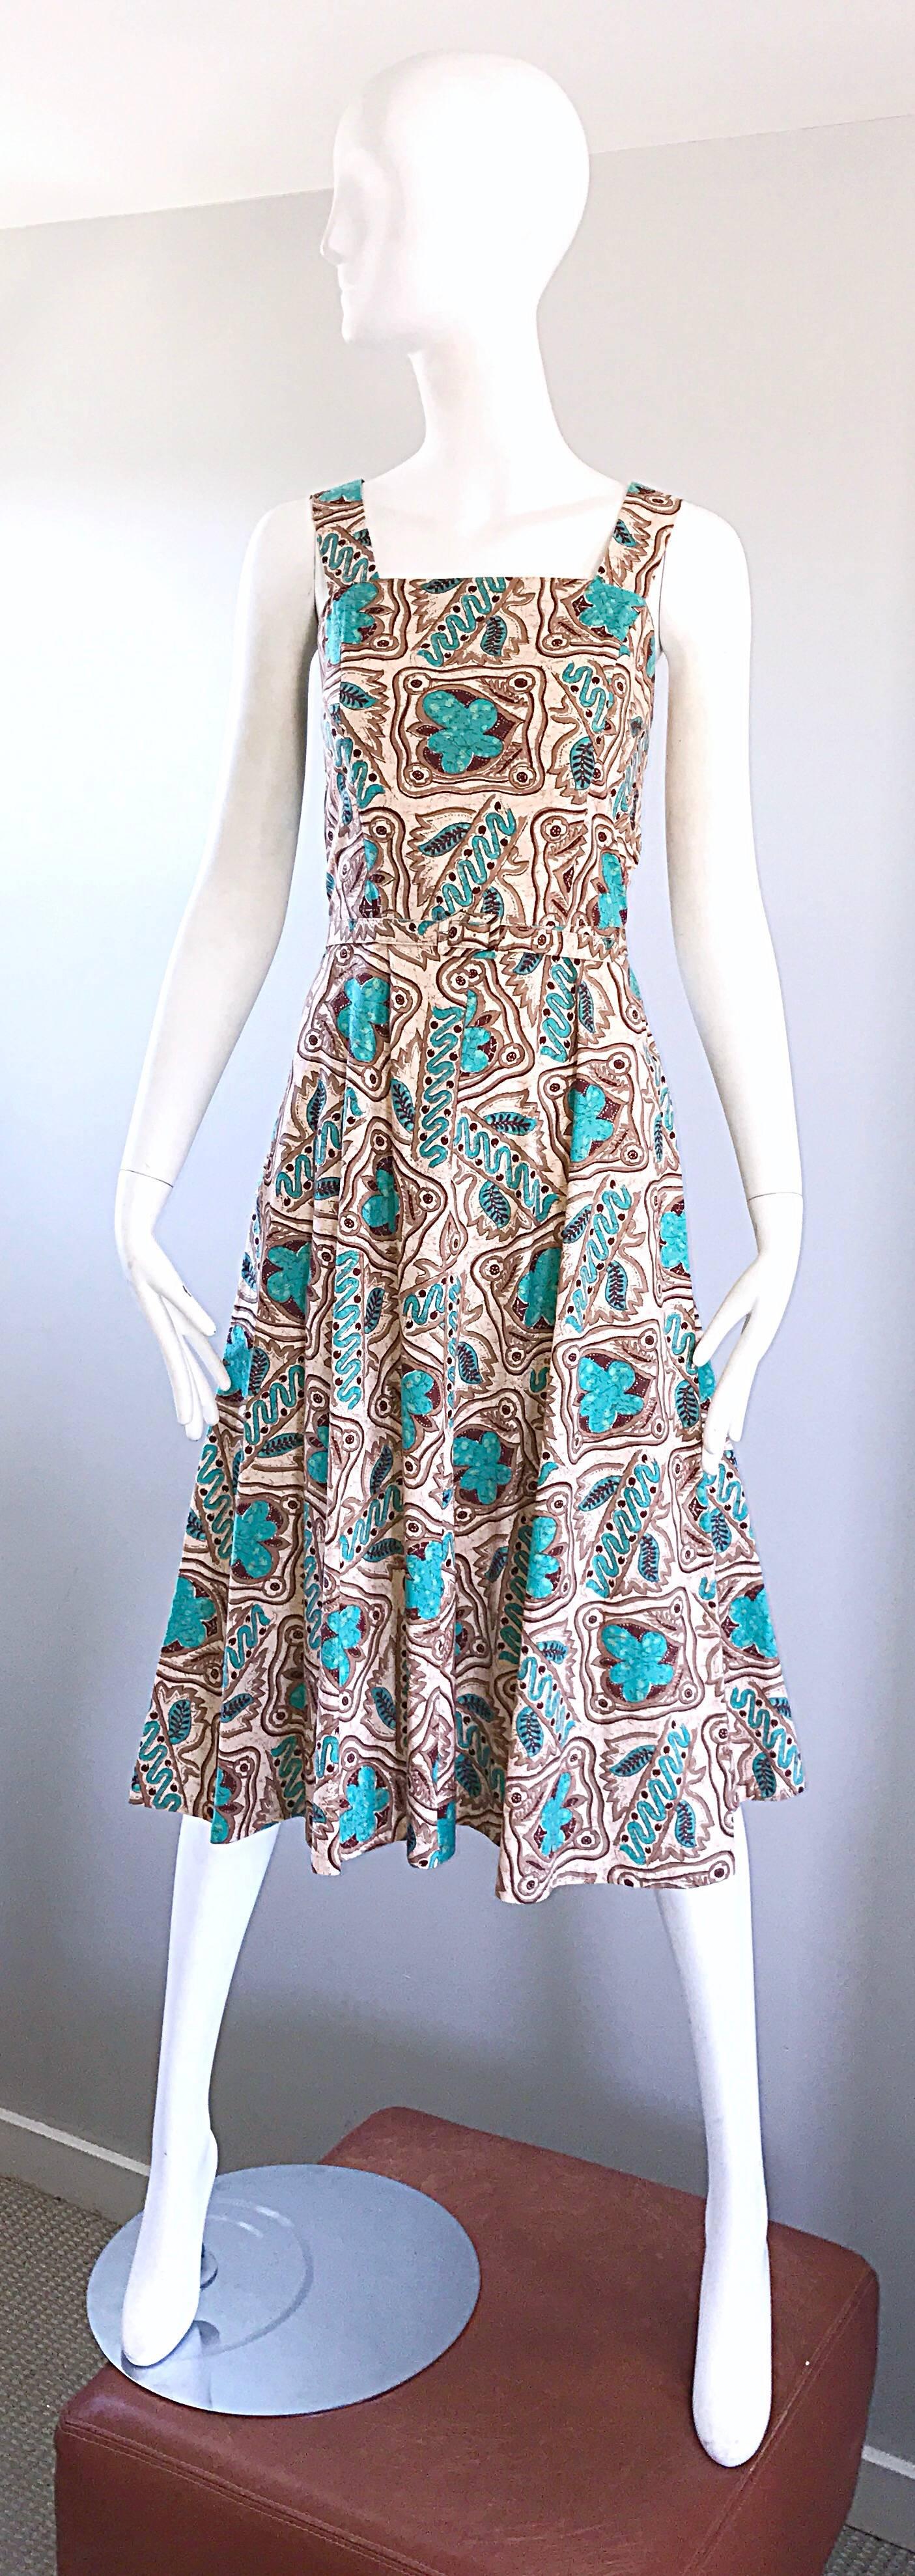 Wonderfully chic vintage 1950s turquoise teal blue, brown, tan and ivory batik print belted cotton Fit n' flare sleeveless dress! Fitted bodice, with a flattering and forgiving full skirt that could easily accommodate a crinoline underneath.